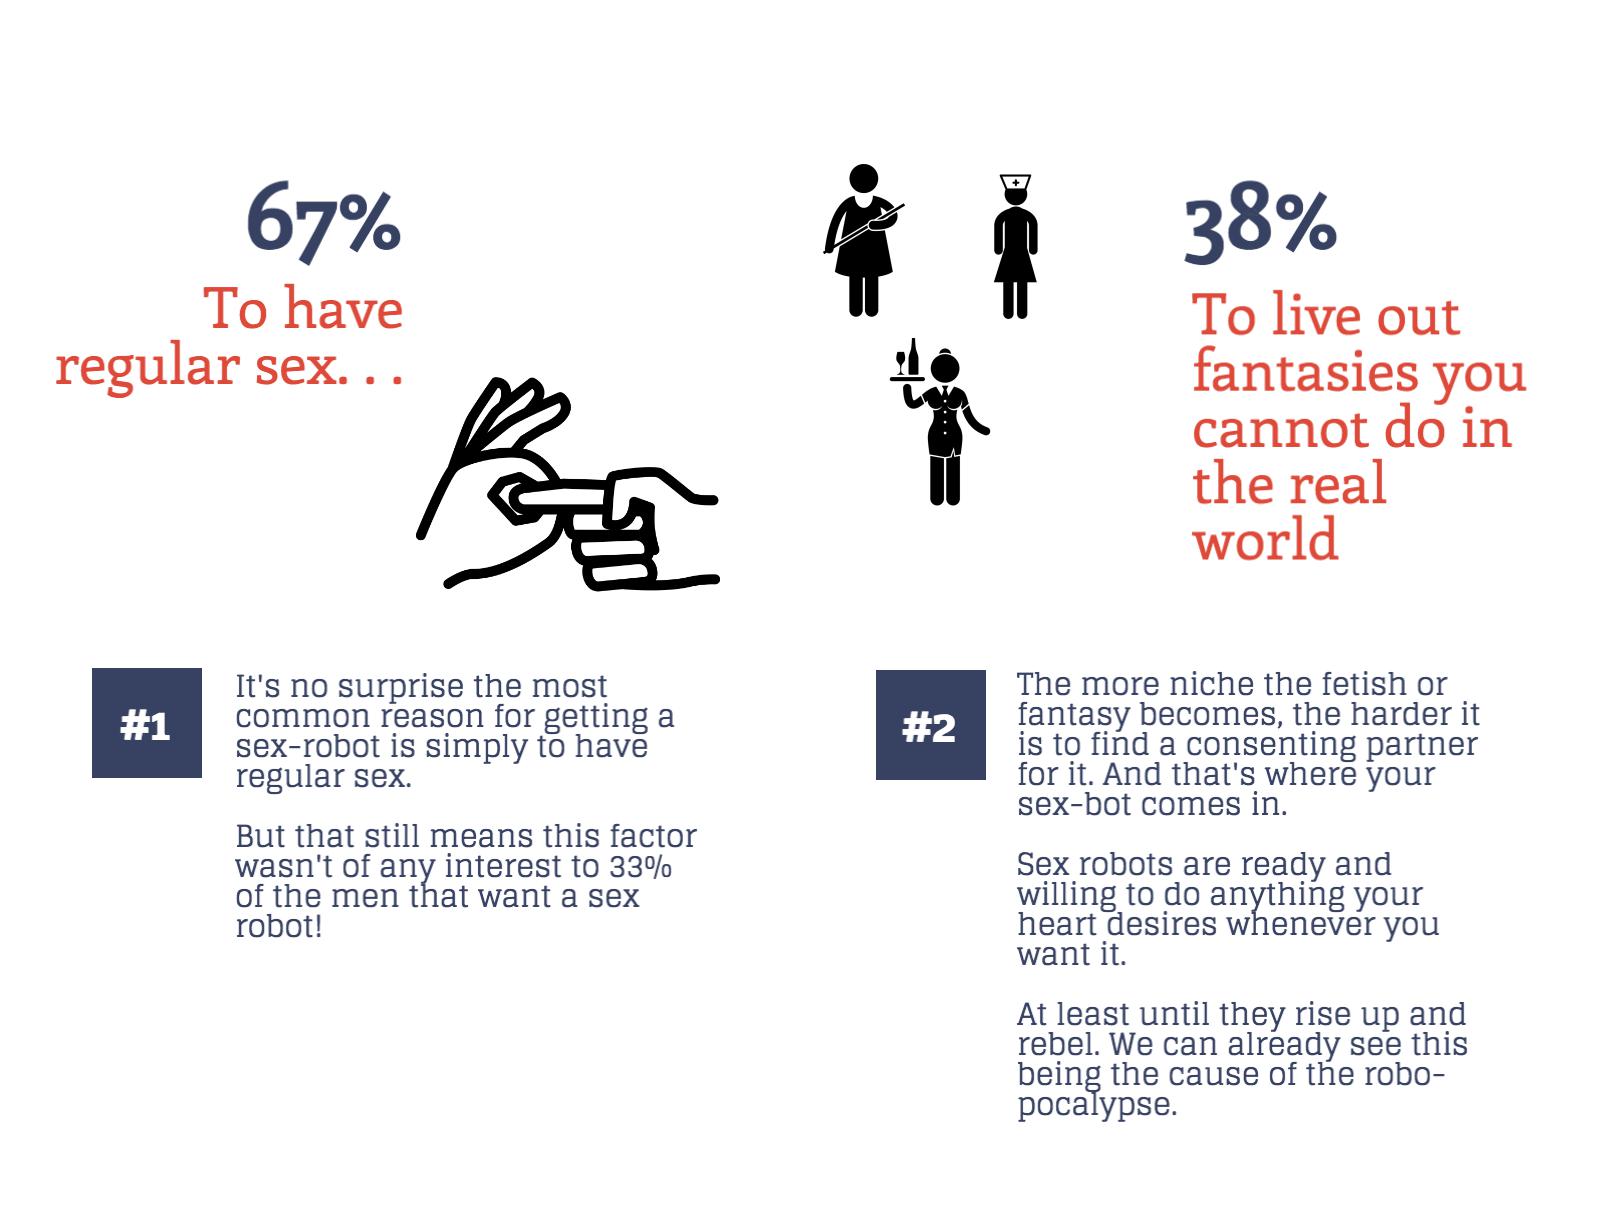 Top 10 reasons why men want sex-robots - infographic